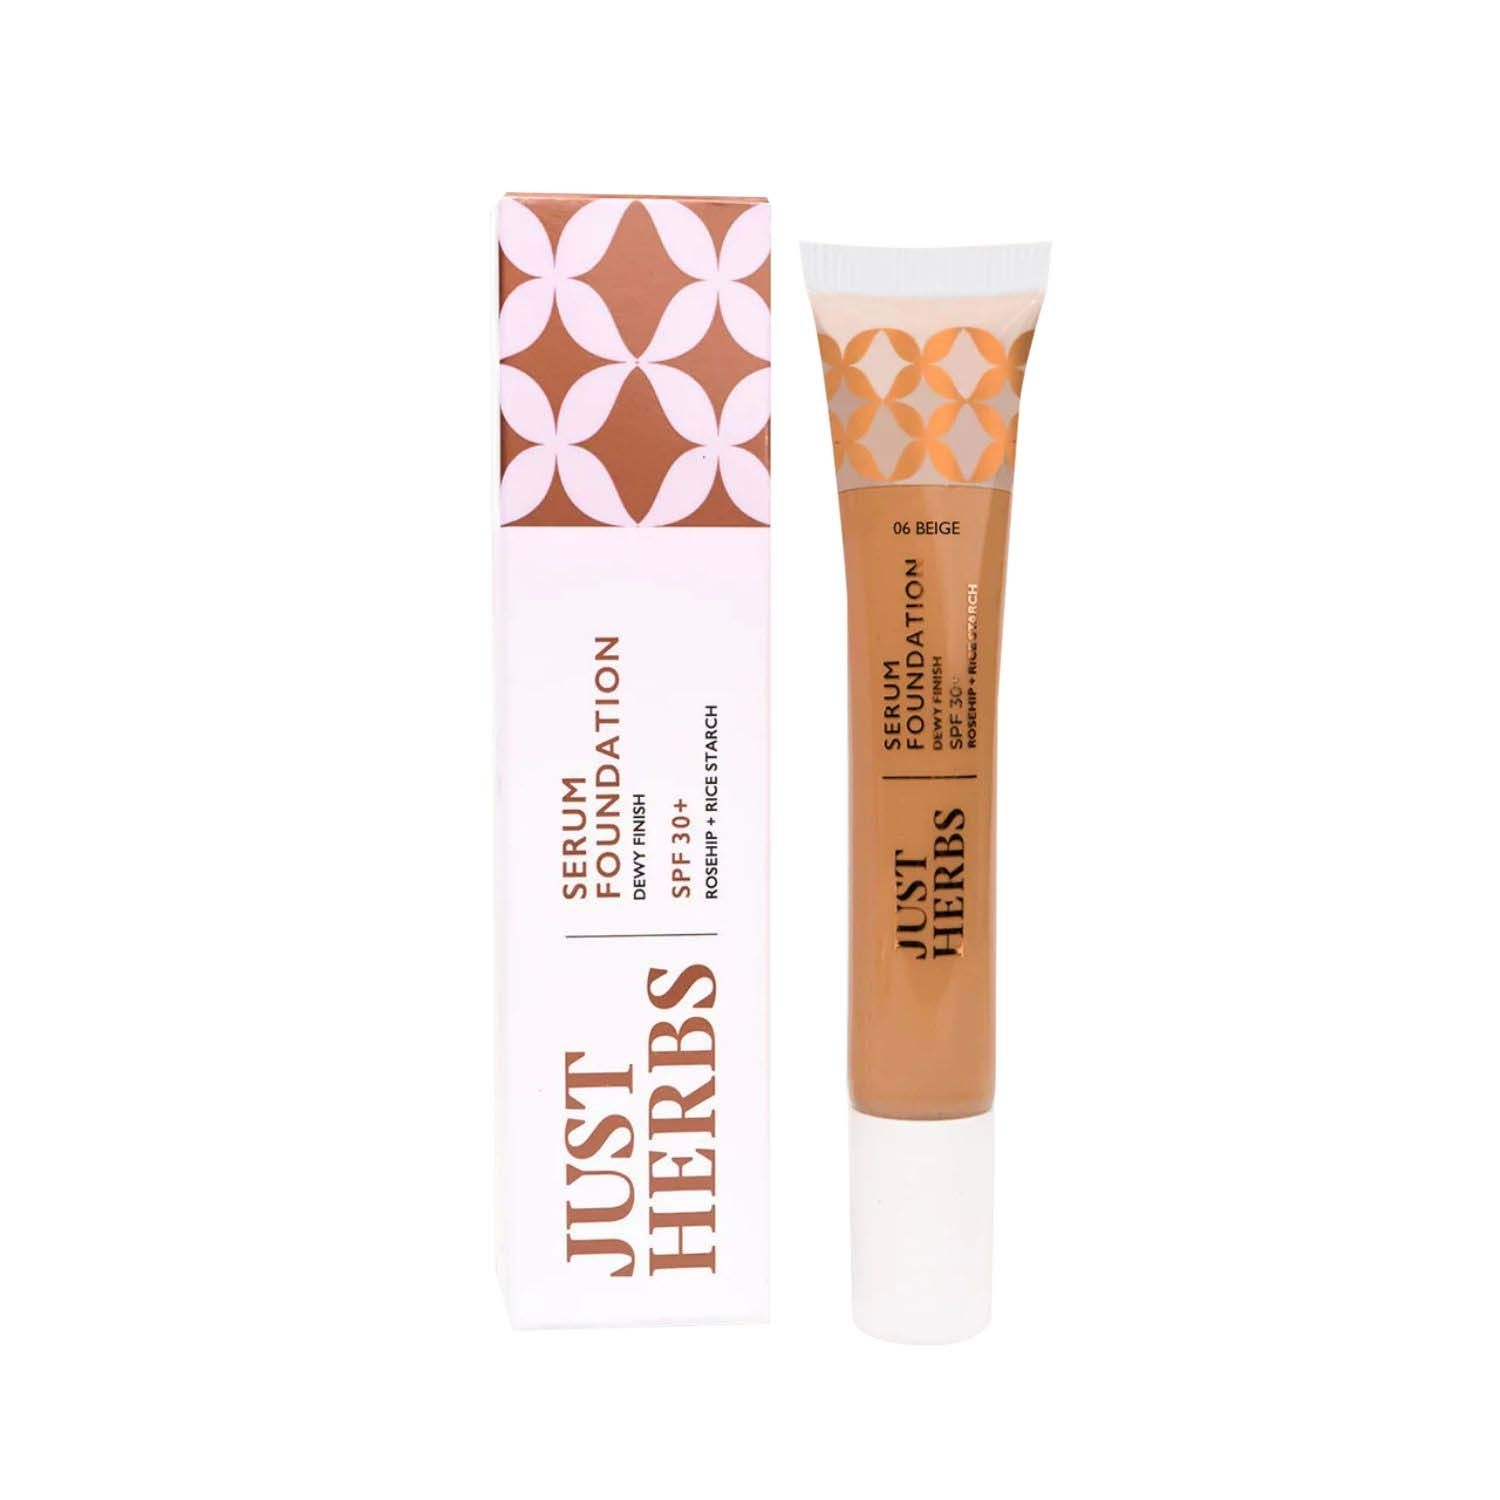 Just Herbs | Just Herbs Serum Foundation Dewy Finish SPF 30+ With Rosehip & Rice Starch - 06 Beige (20ml)